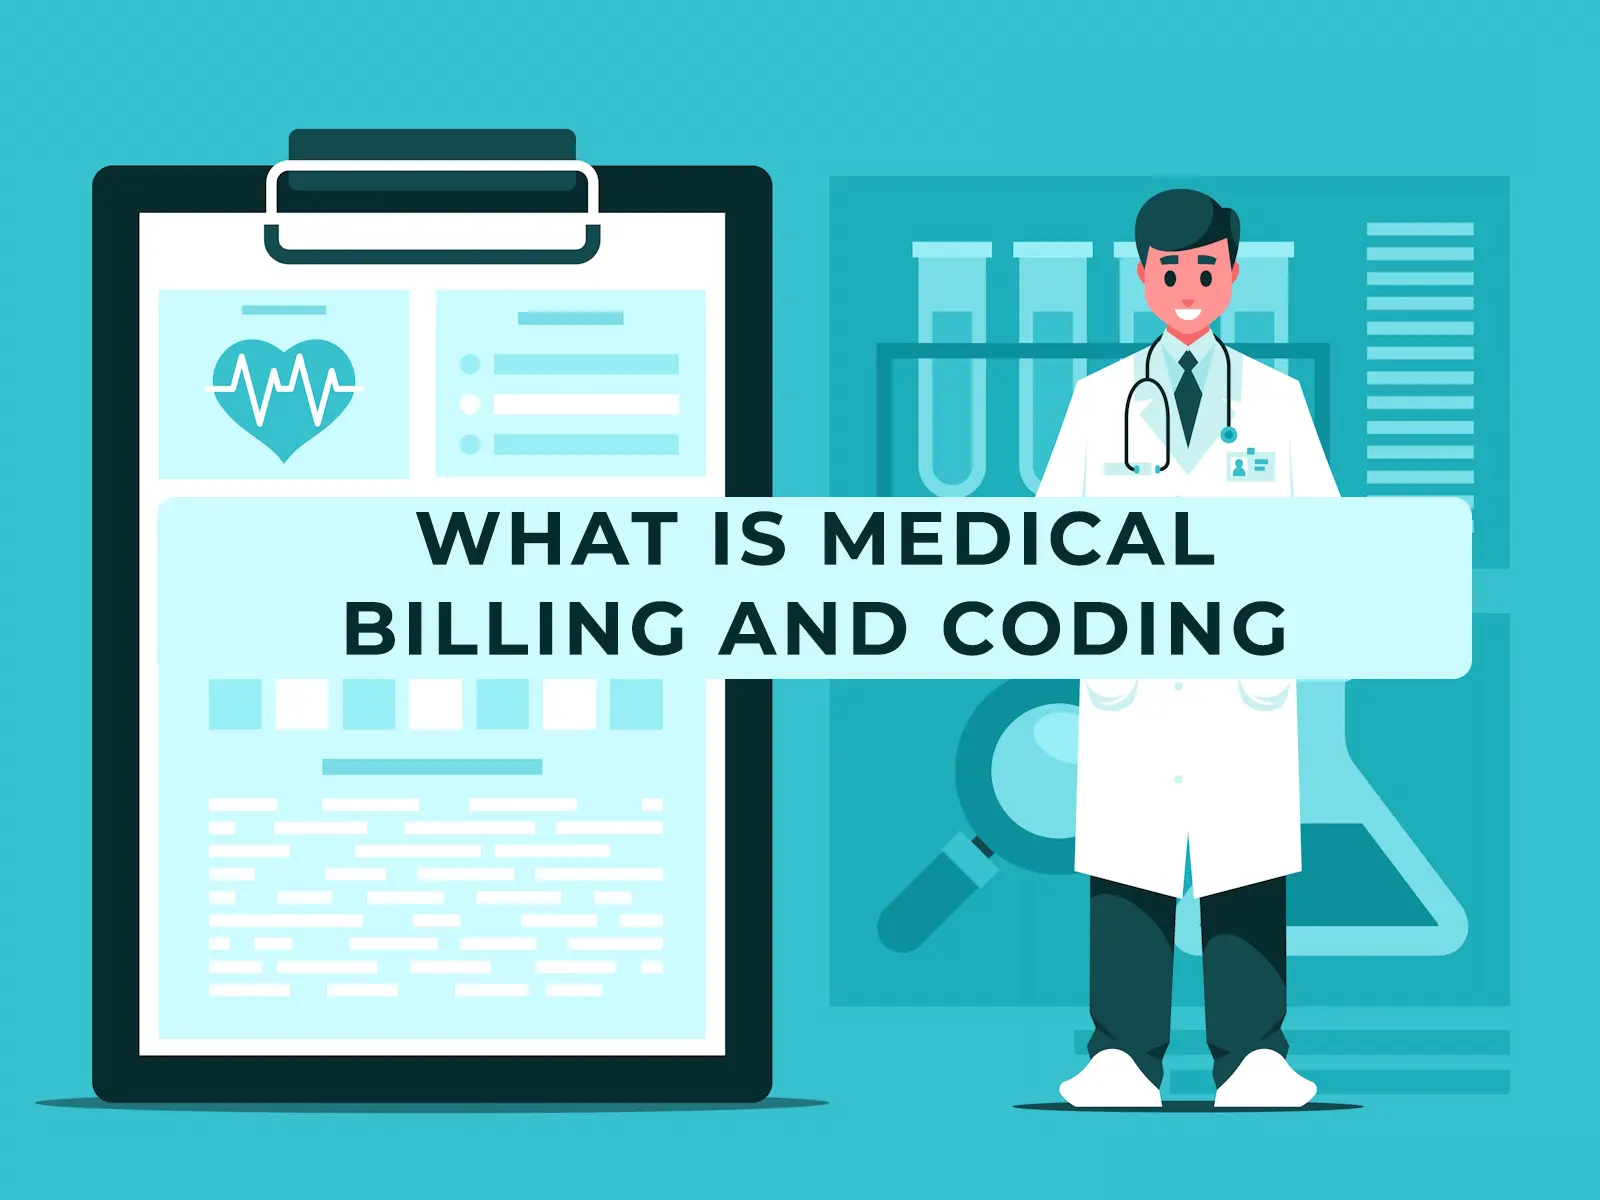 What is Medical Billing and Coding company